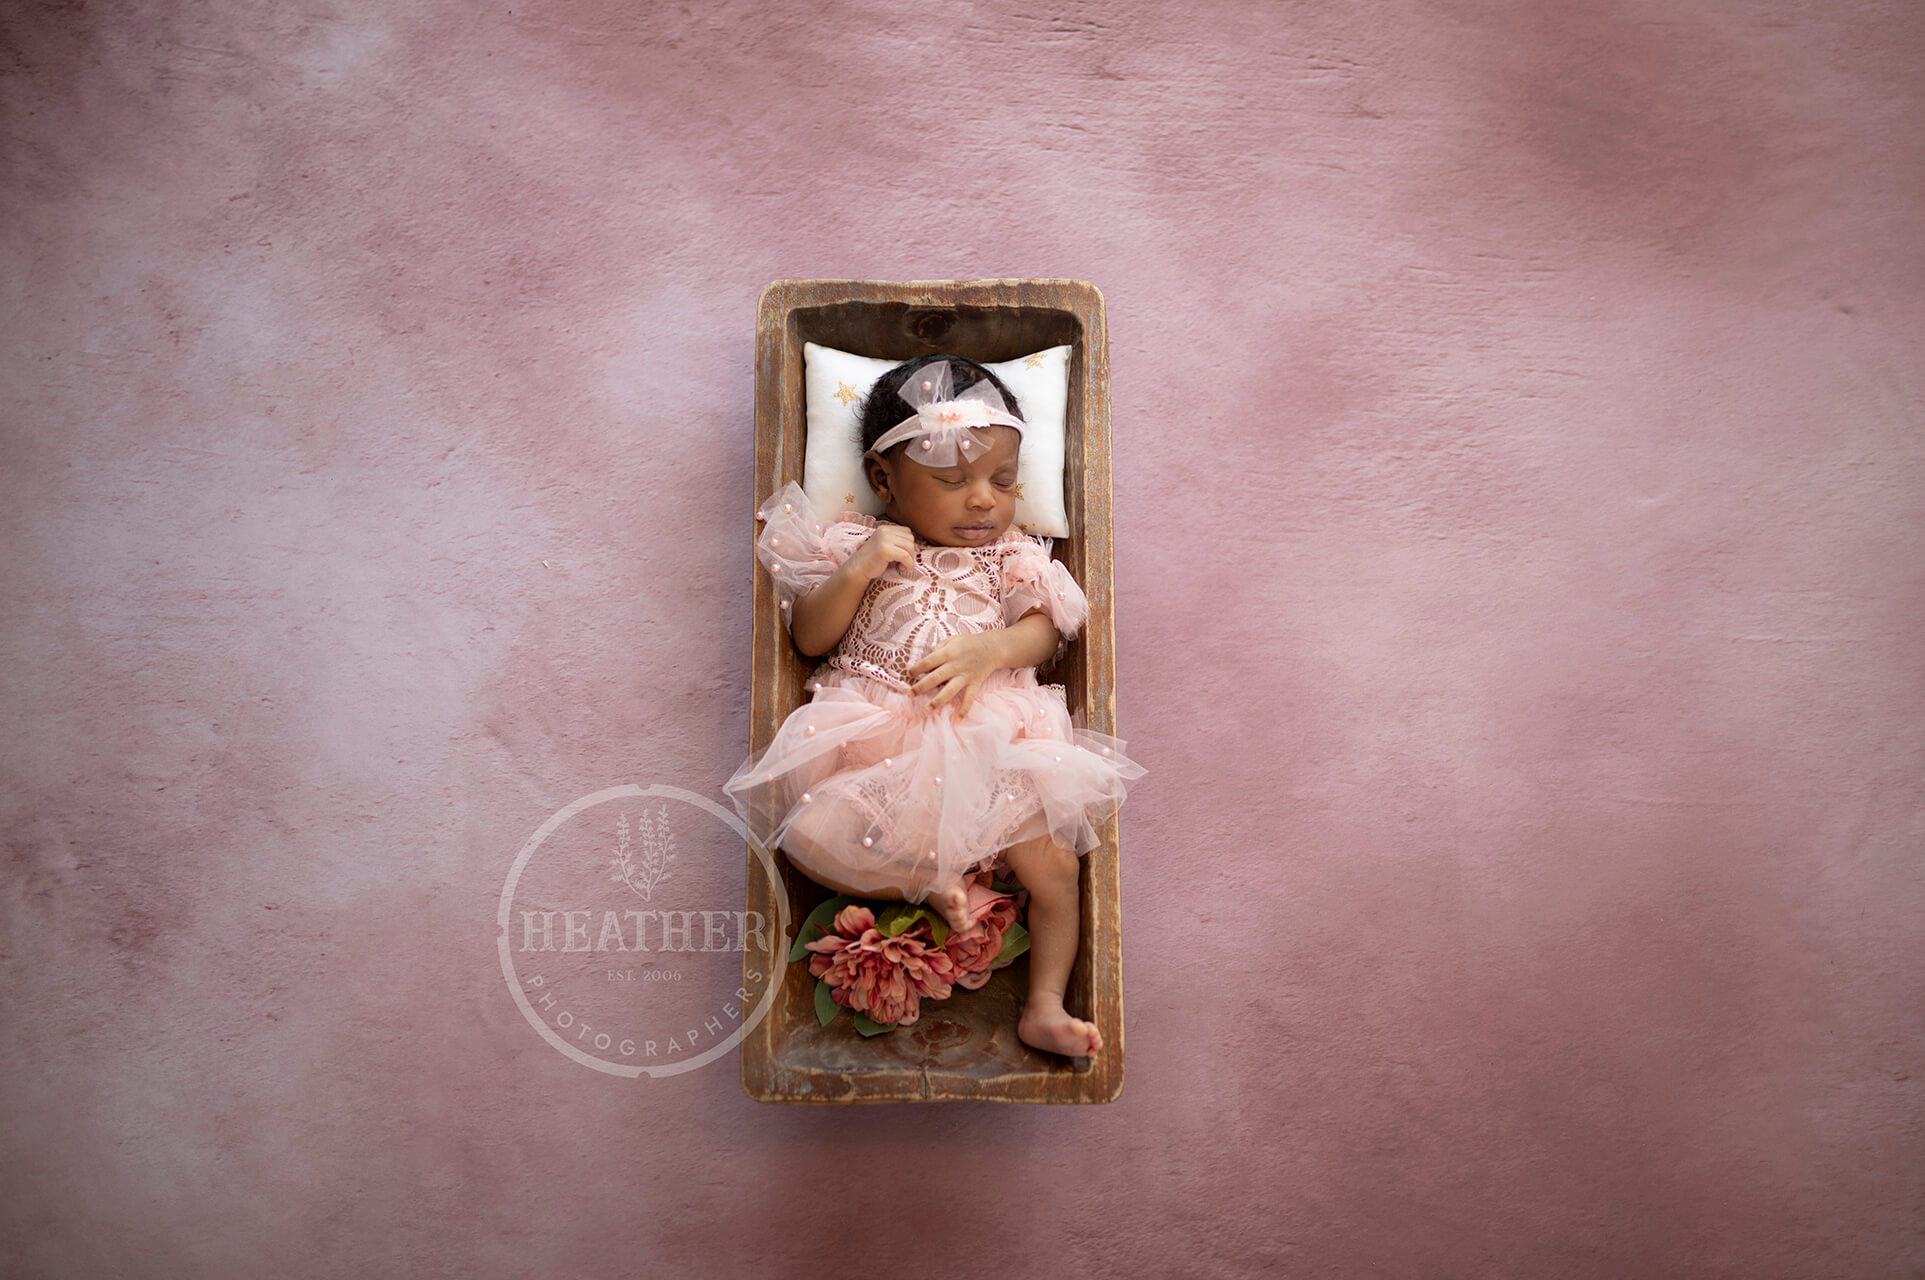 A soft pink backdrop adds a touch of sweetness and innocence, ideal for capturing baby girl portraits